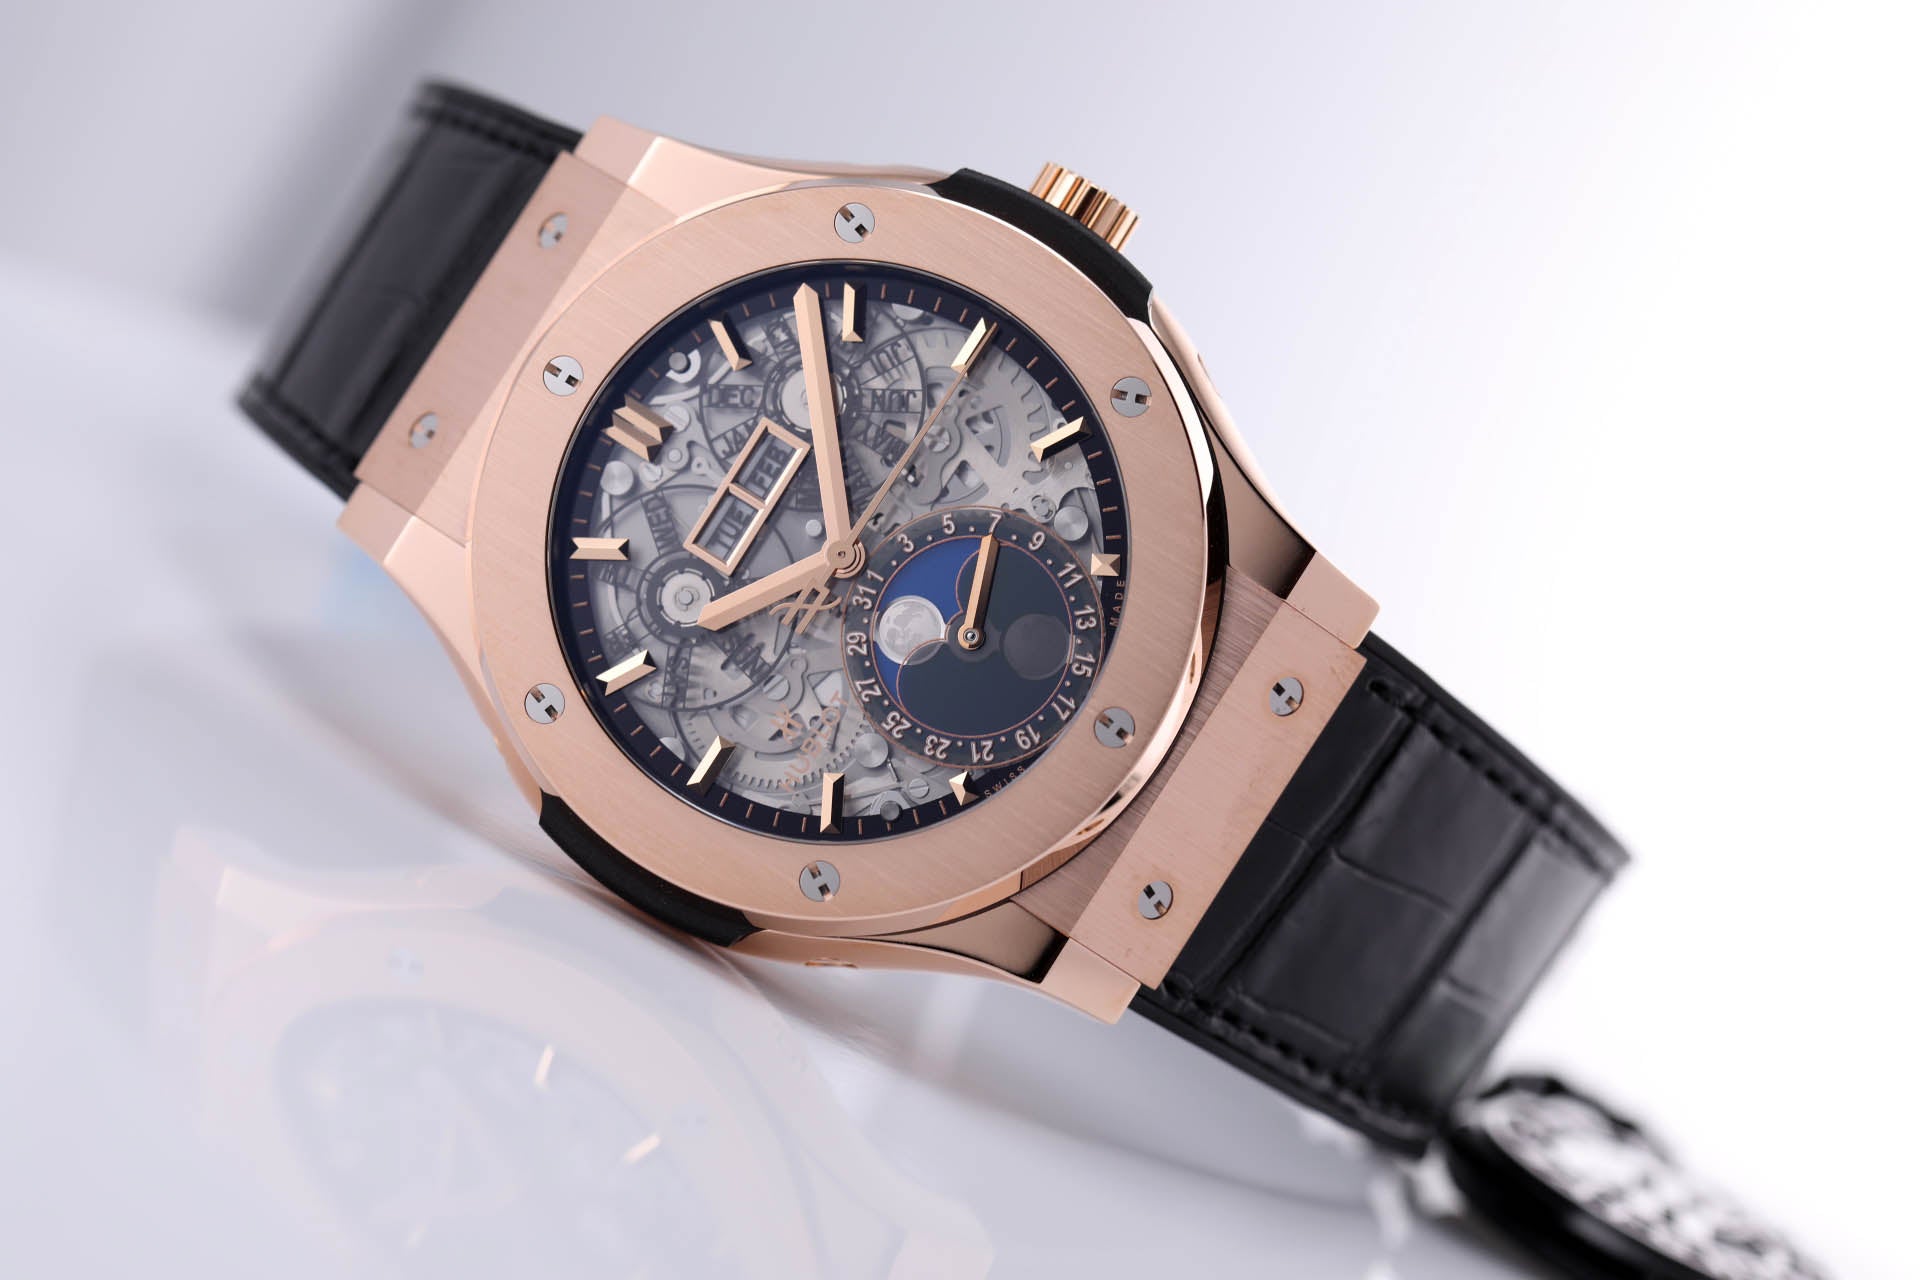 Hublot Classic Fusion Aerofusion Moonphase 45mm Ref 517 Ox 0180 Lr The Luxury Well